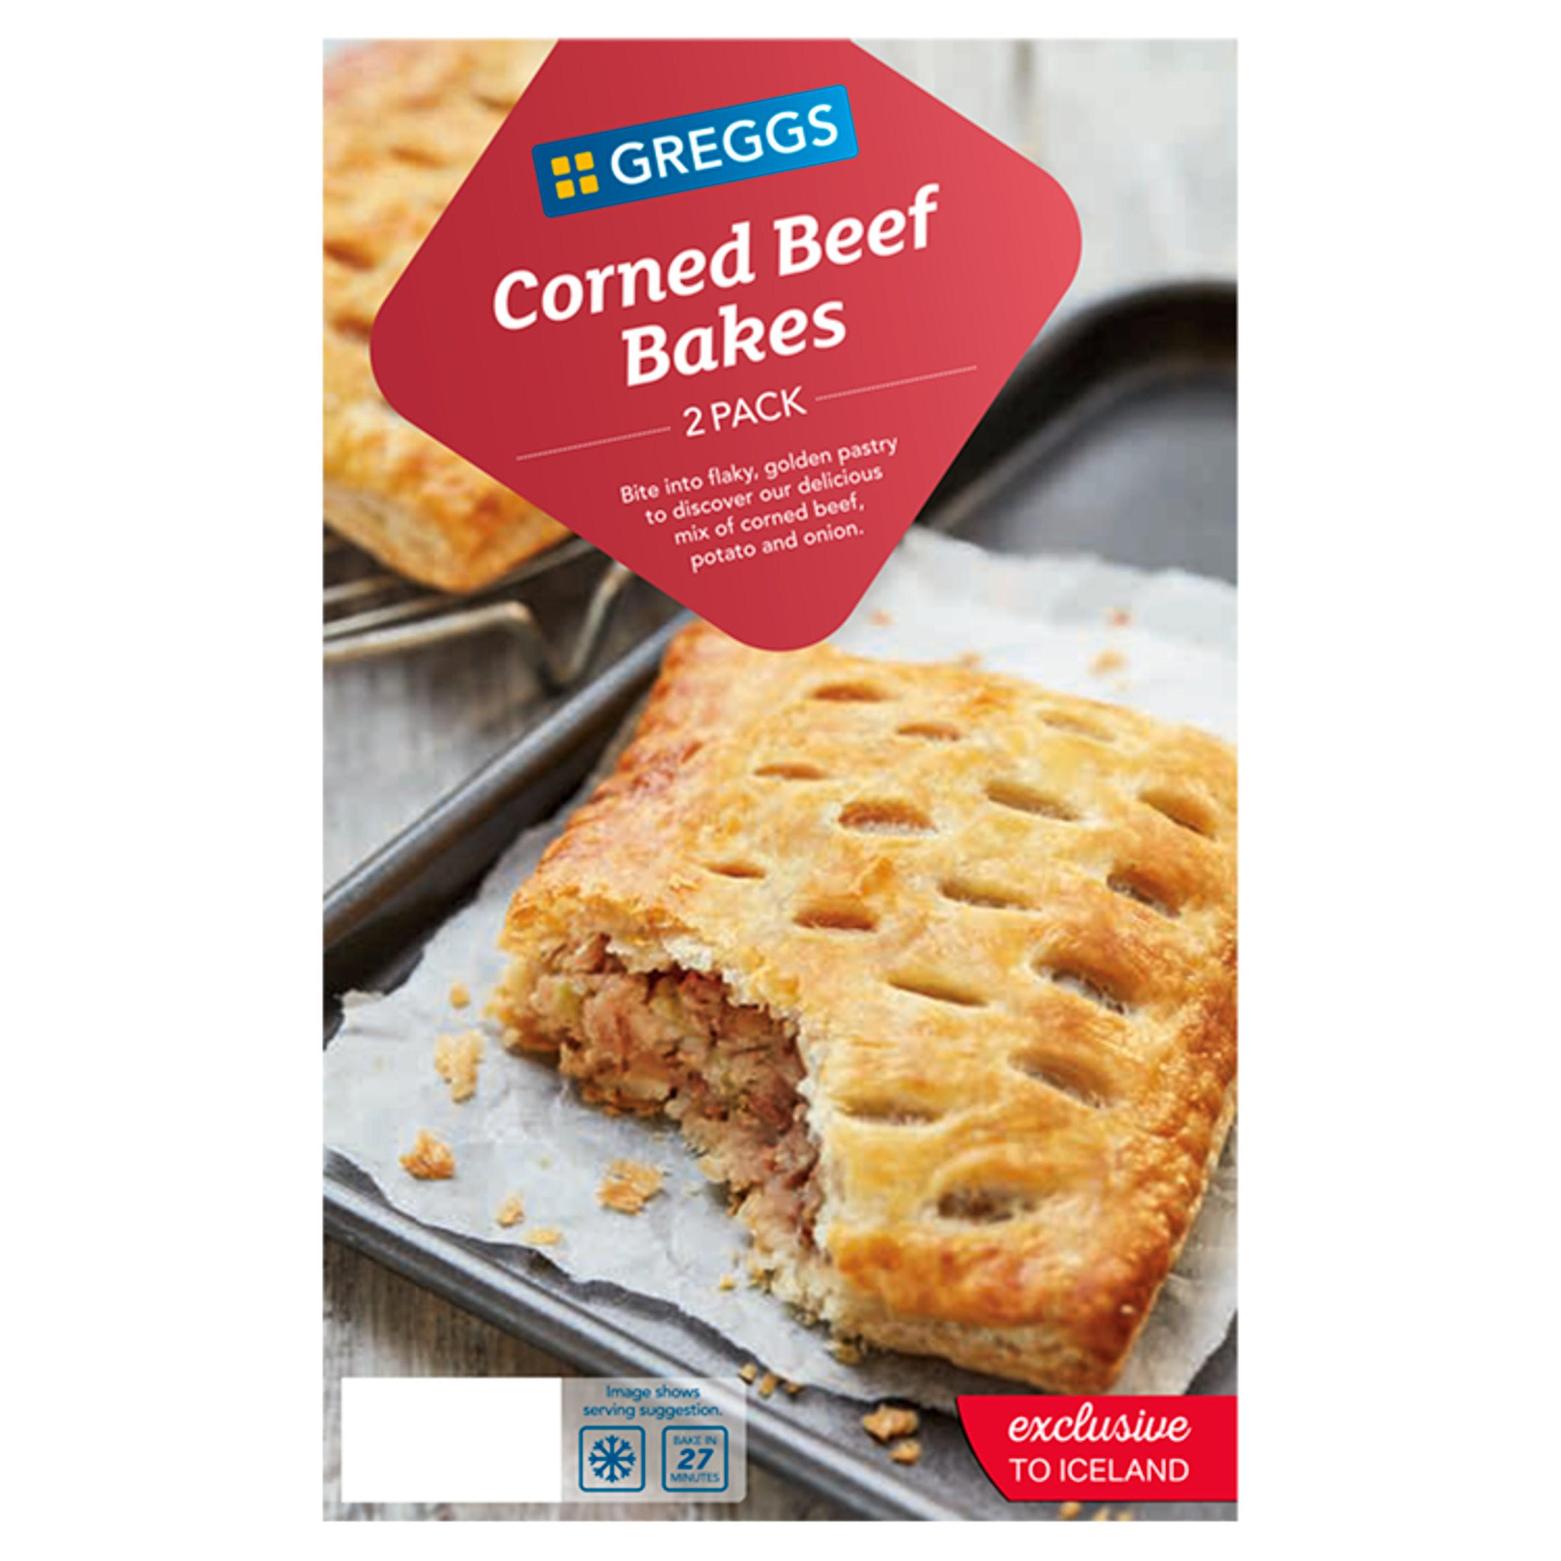 Greggs 2 Corned Beef Bakes 290g offers at £3 in Iceland